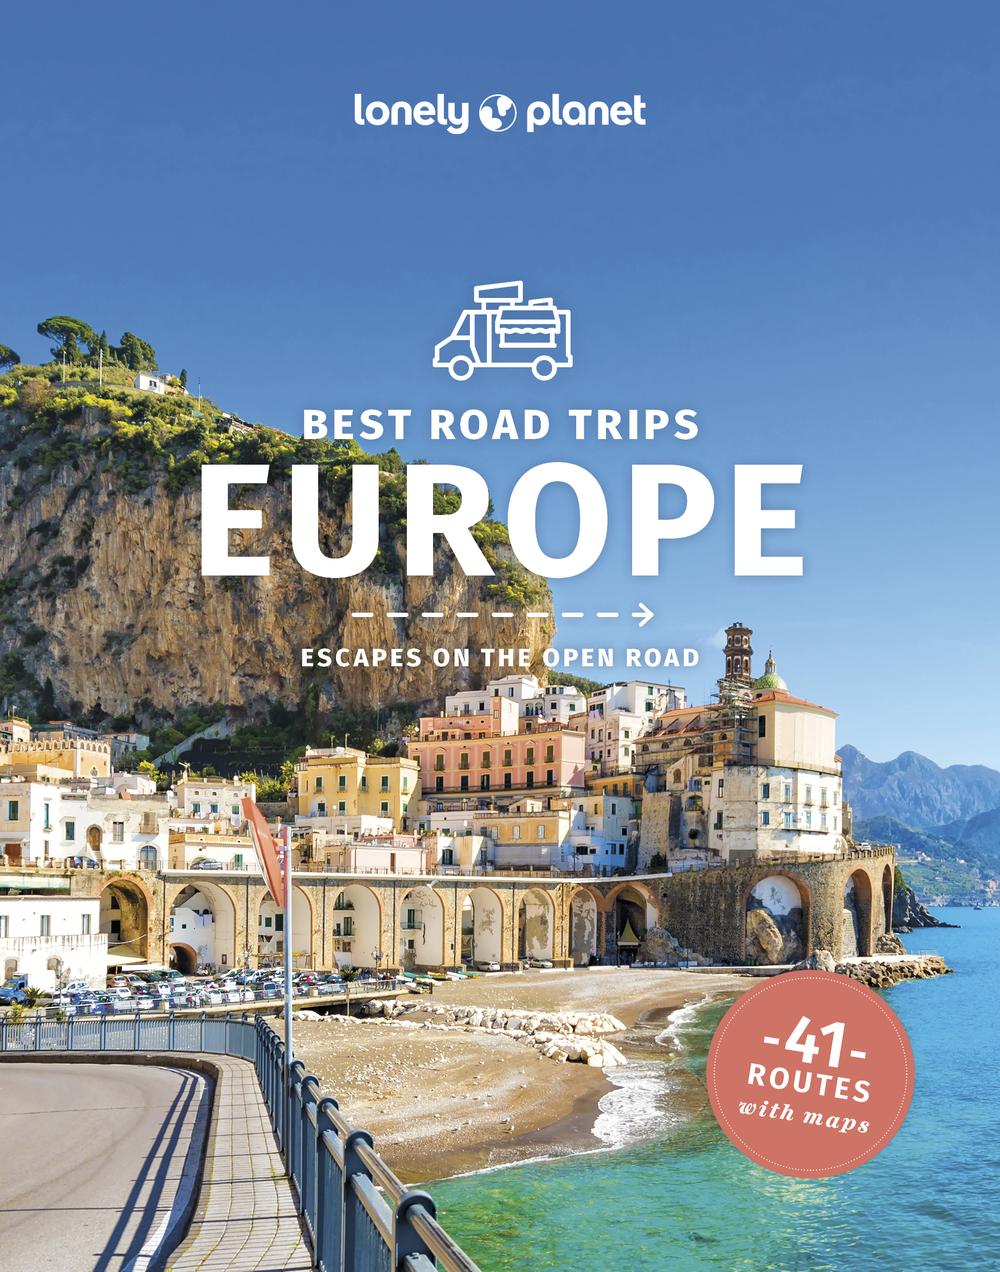 lonely planet best road trips europe 2